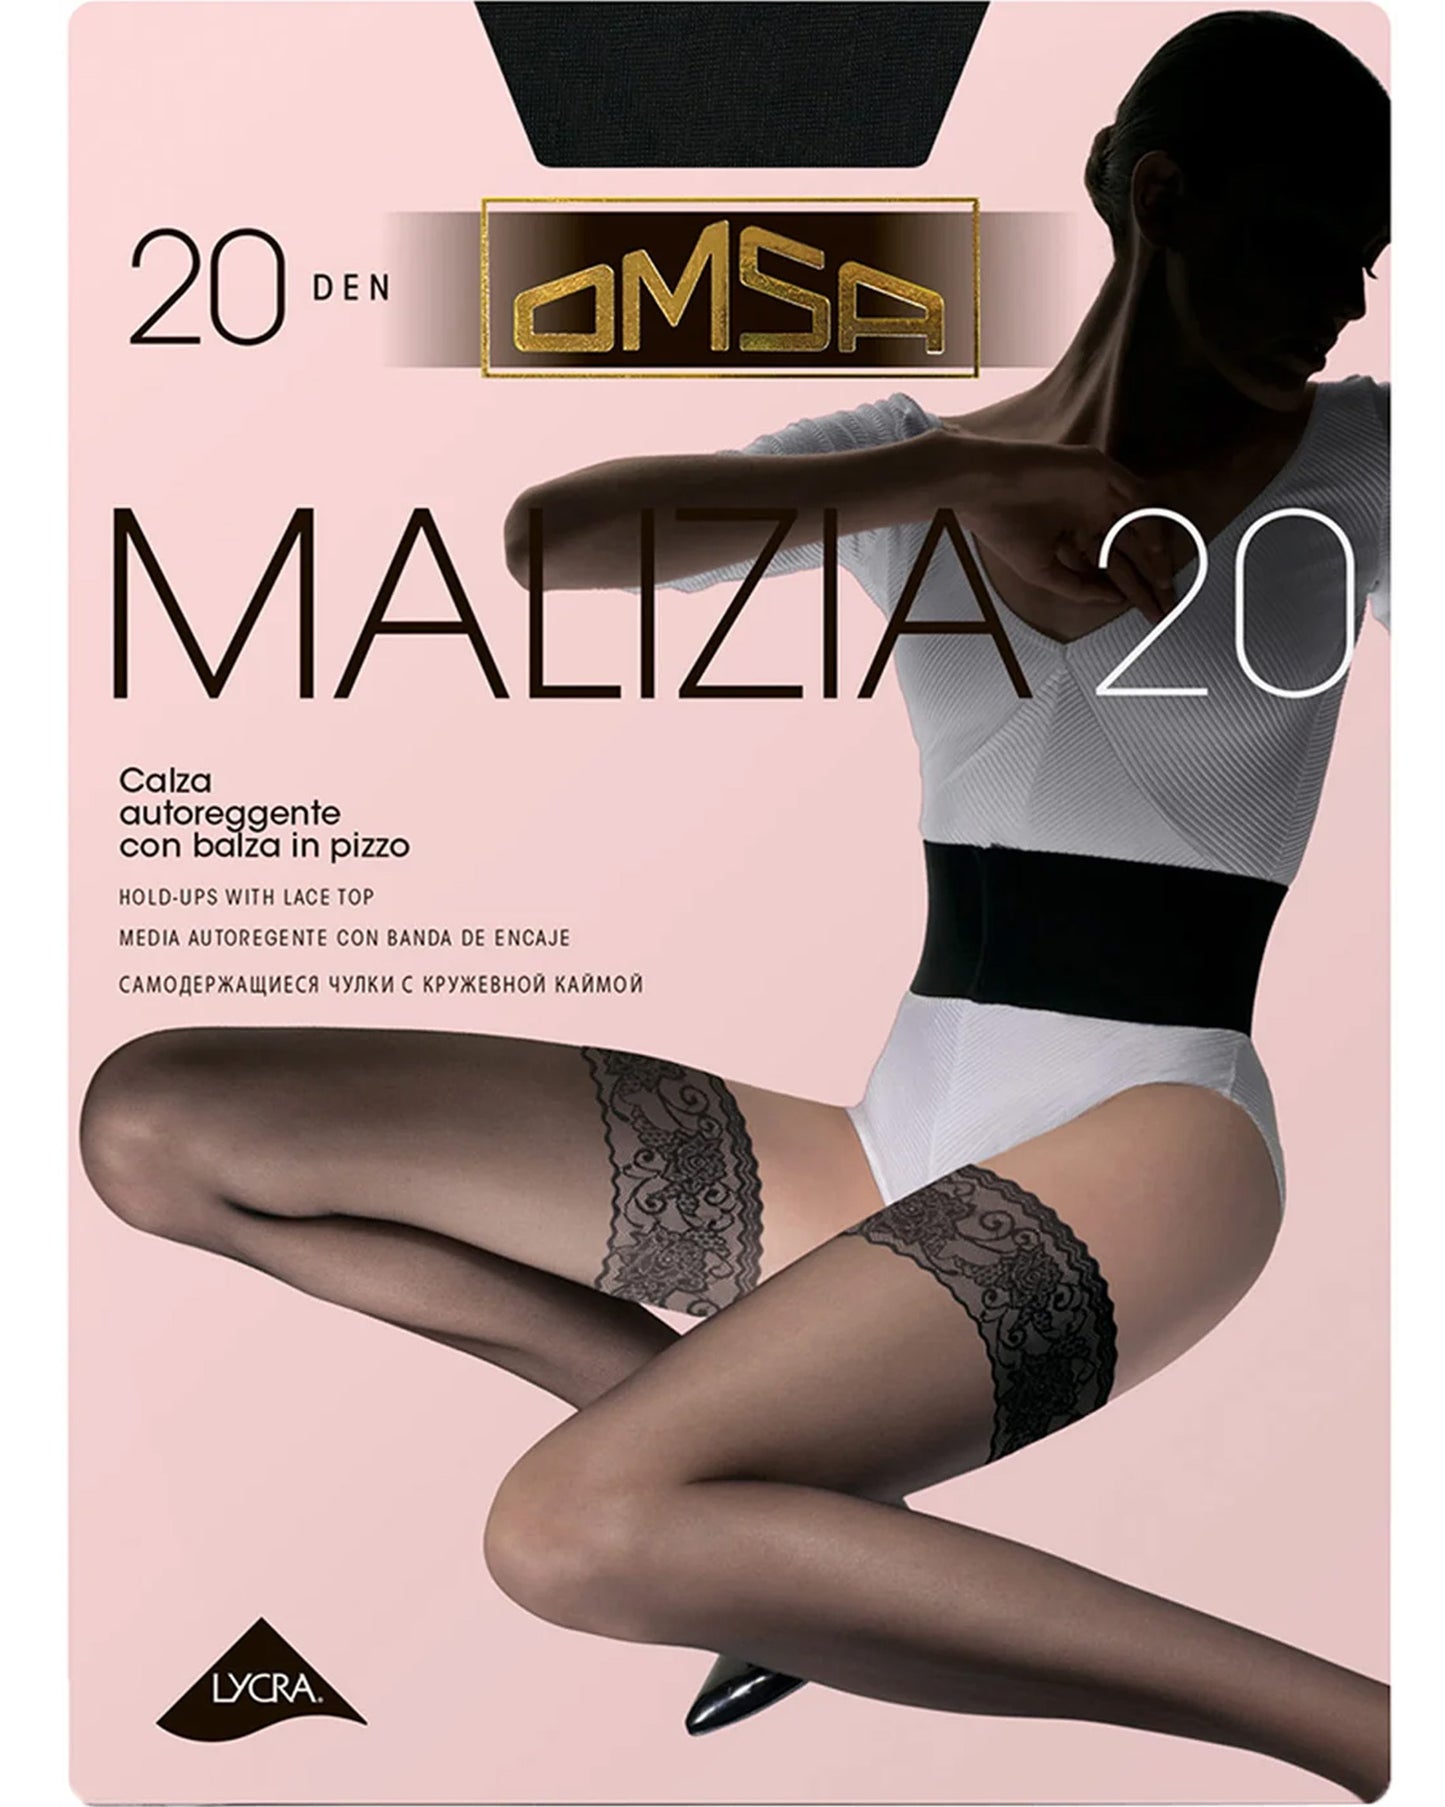 Omsa Malizia 20 Autoreggente - classic sheer hold ups with lace top and silicone